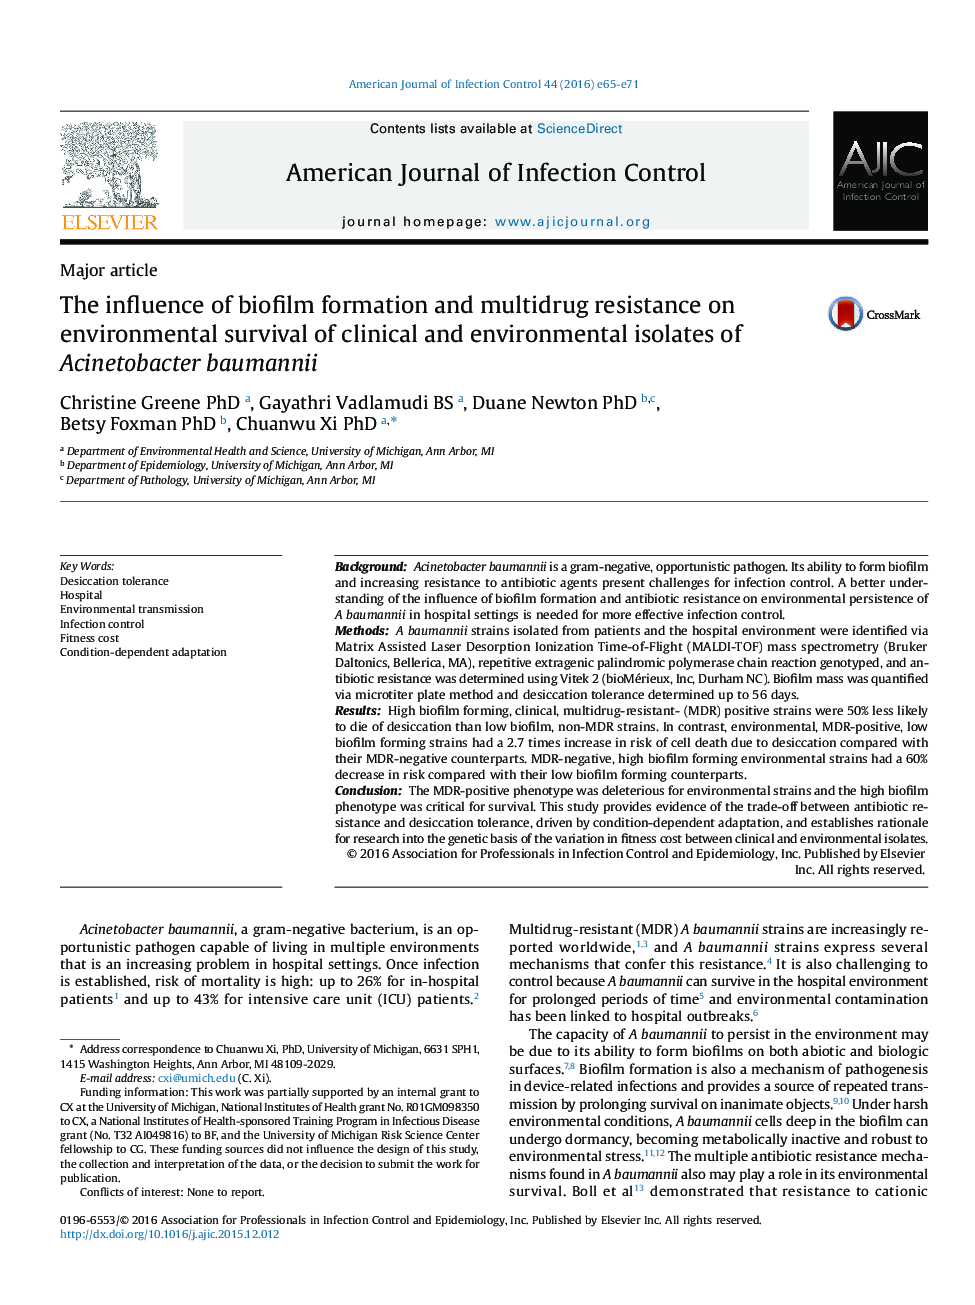 Major articleThe influence of biofilm formation and multidrug resistance on environmental survival of clinical and environmental isolates of Acinetobacter baumannii